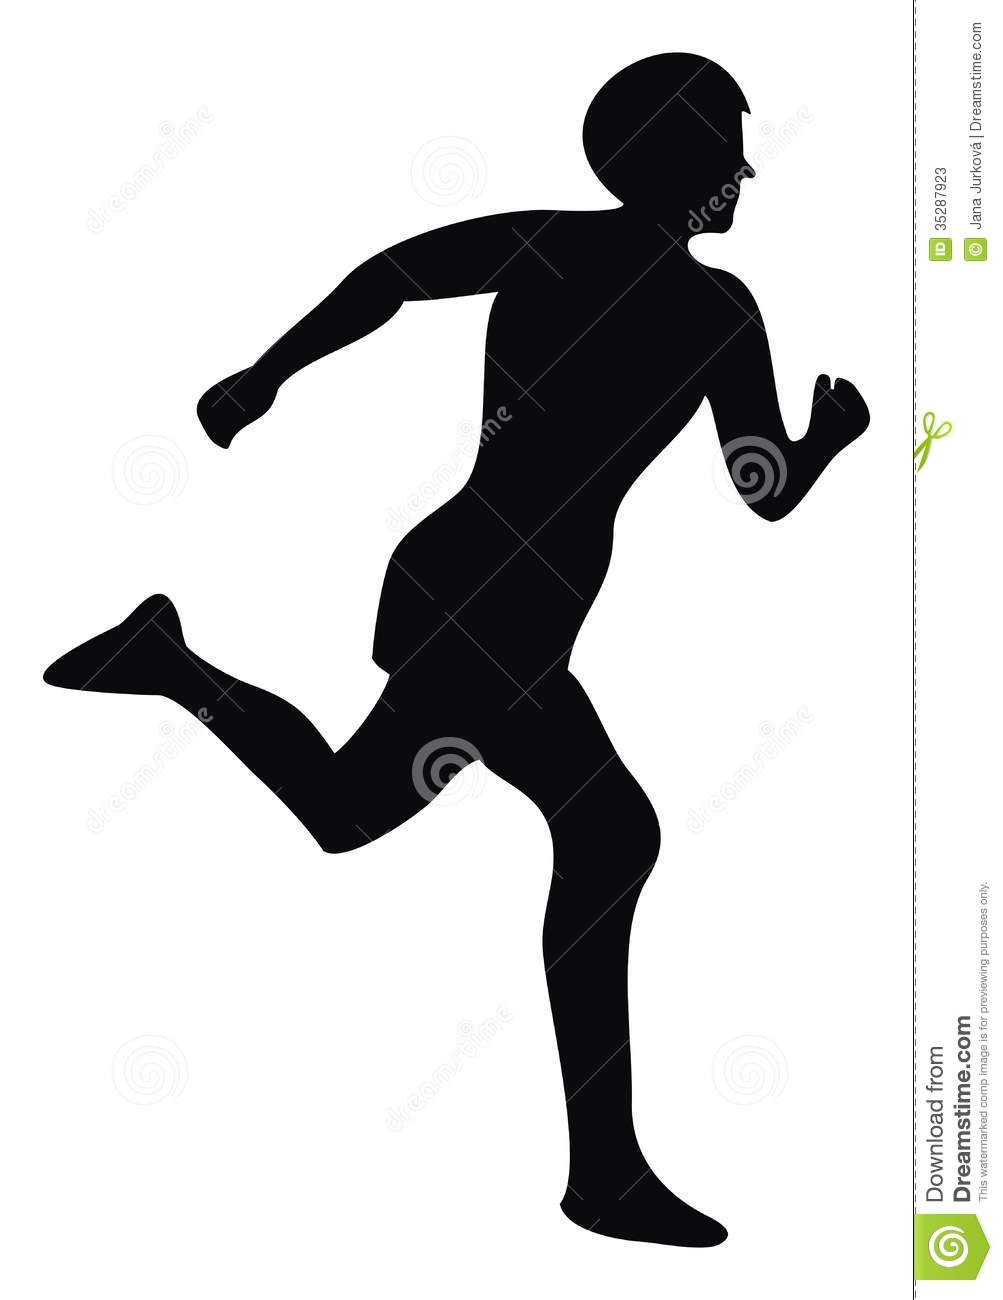 Runner 20clipart   Clipart Panda   Free Clipart Images